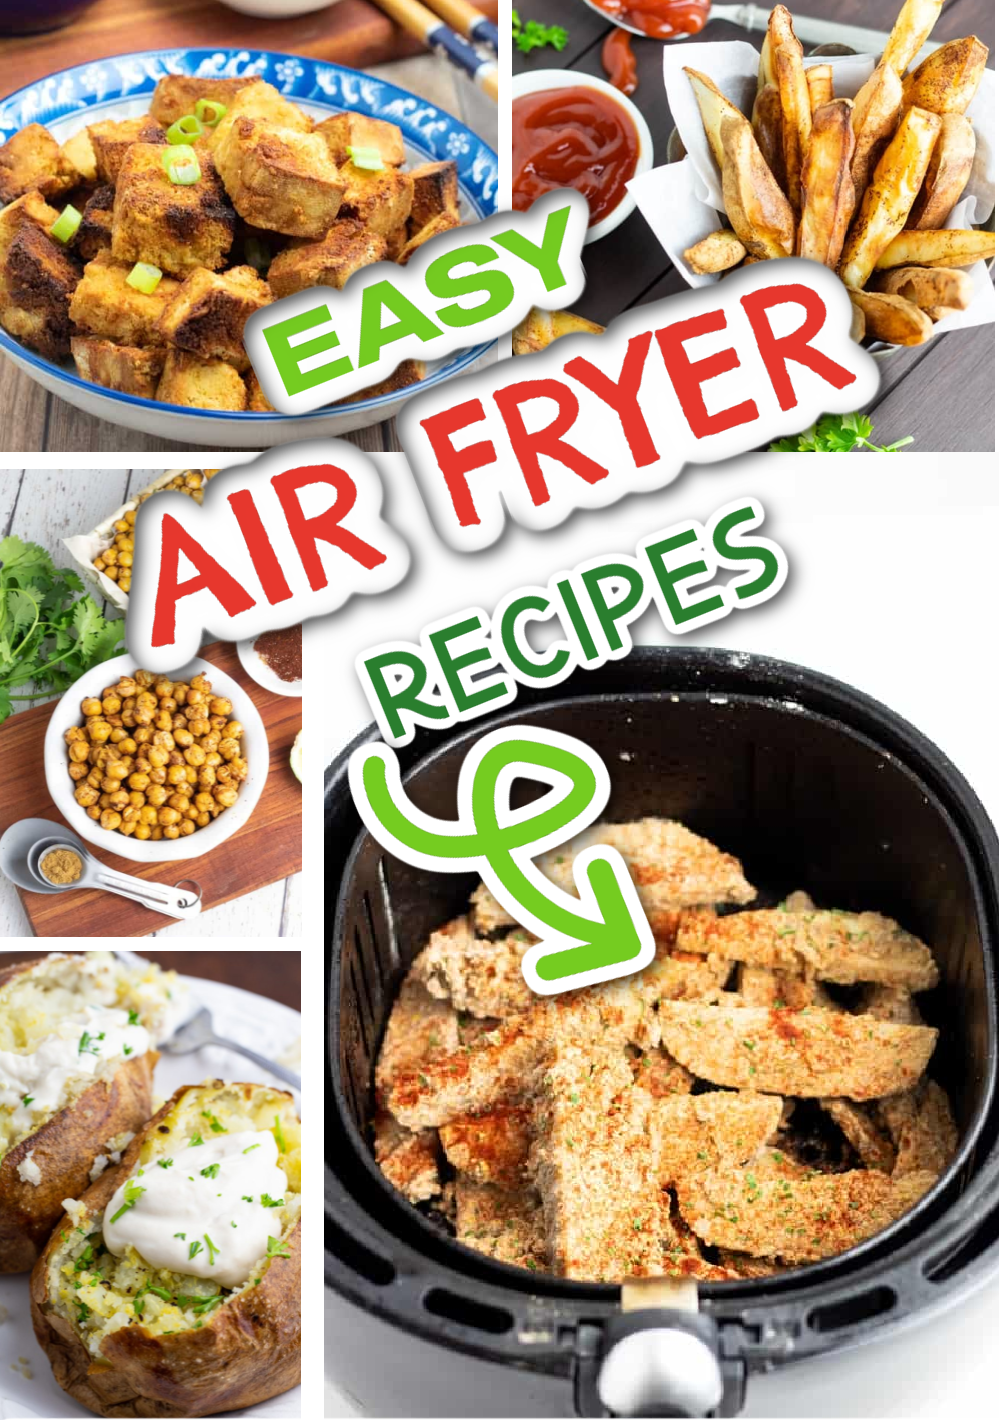 https://eatplant-based.com/wp-content/uploads/2019/05/Air-Fryer-Recipes-Feature-SMALL.png